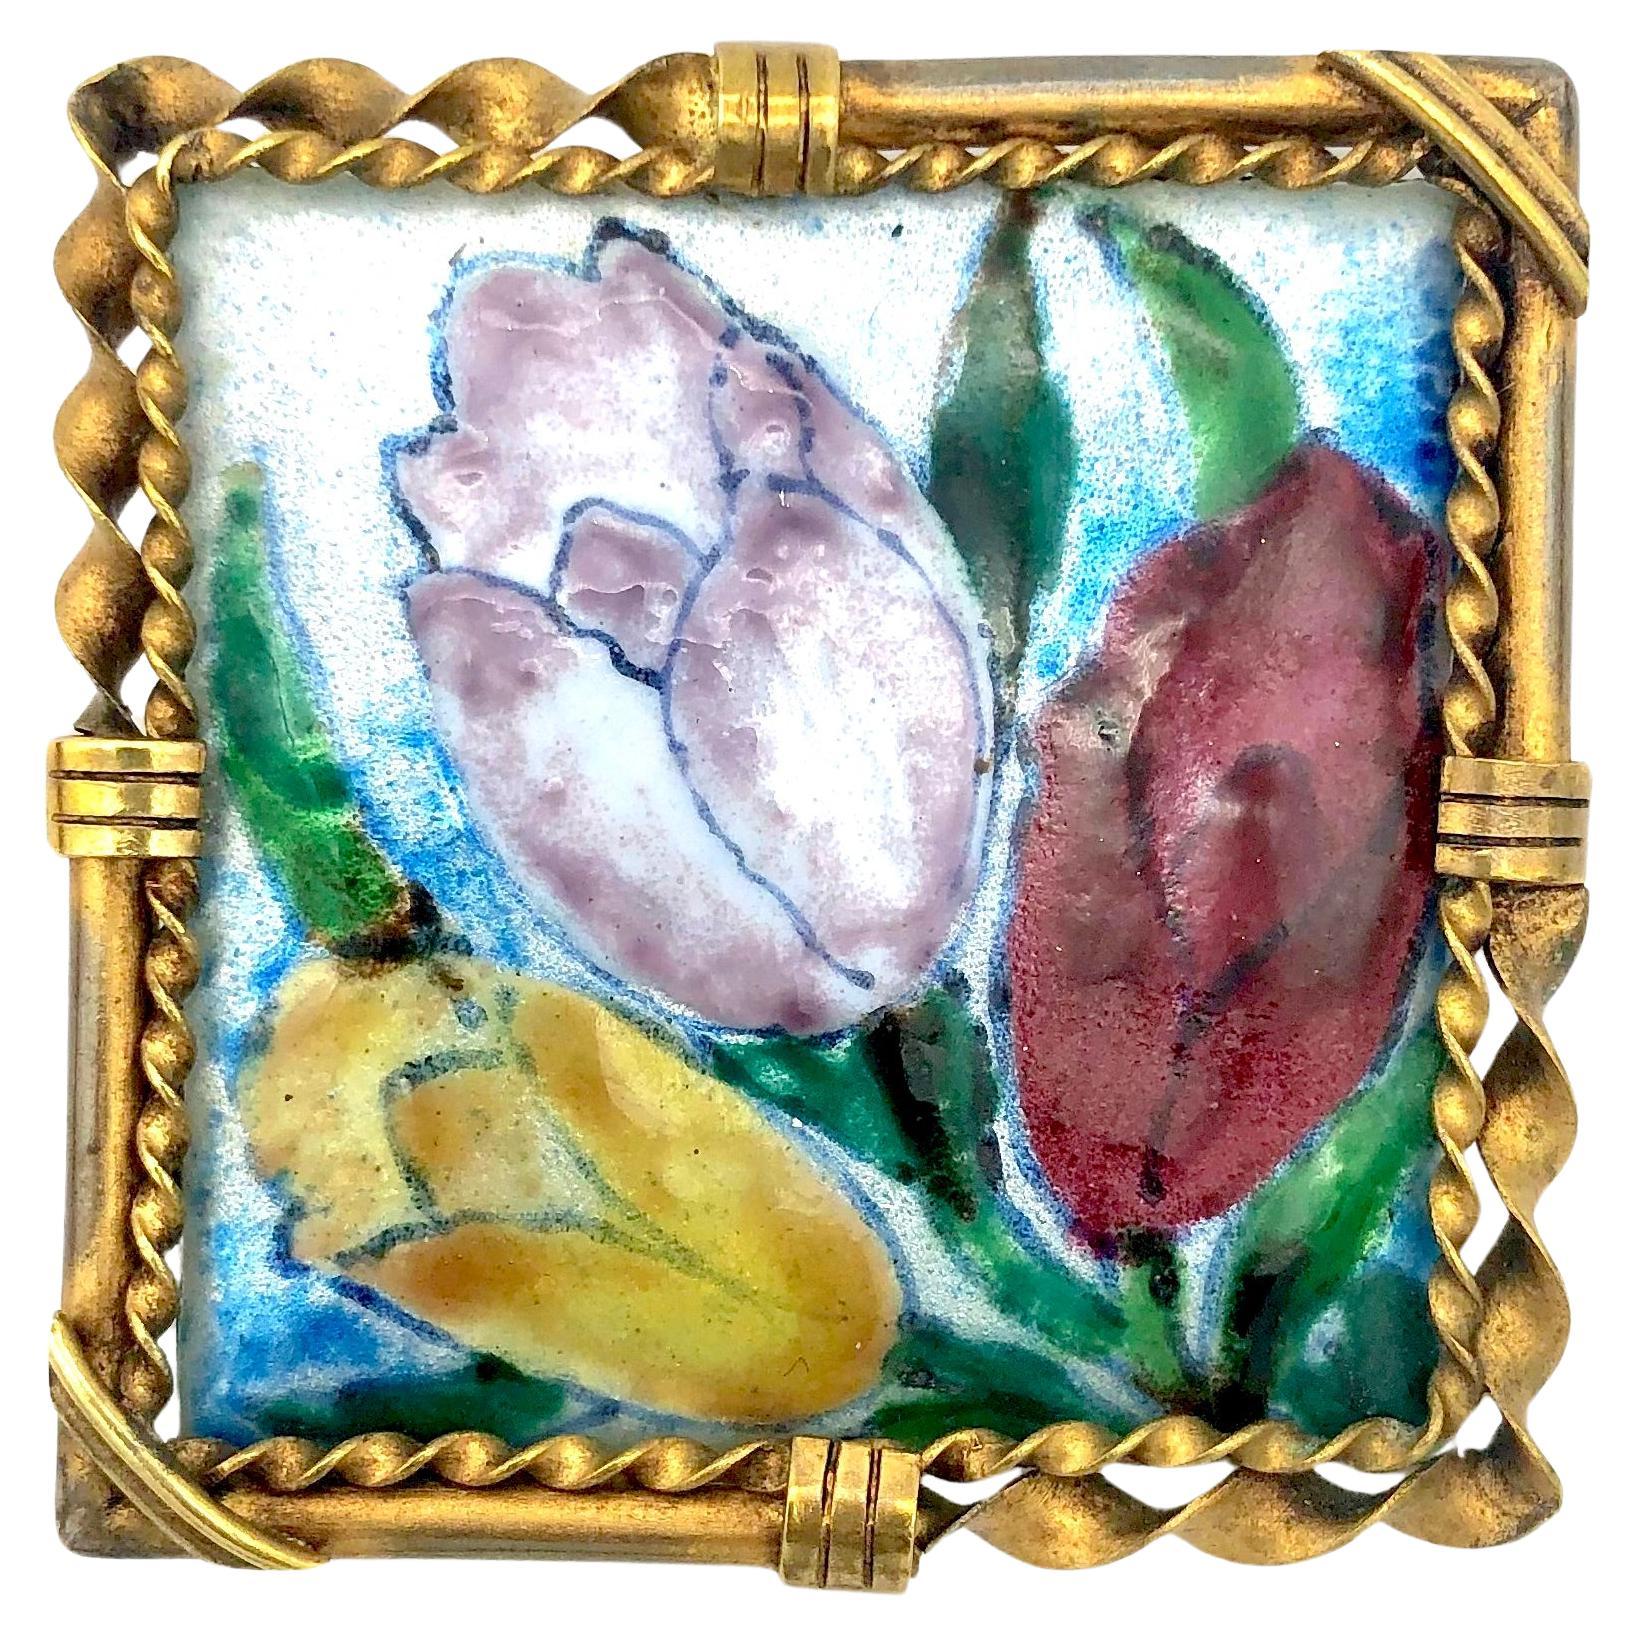 Antique Art Deco Brooch Tulips Polychrome Enamel Painting on Copper Brass Frame